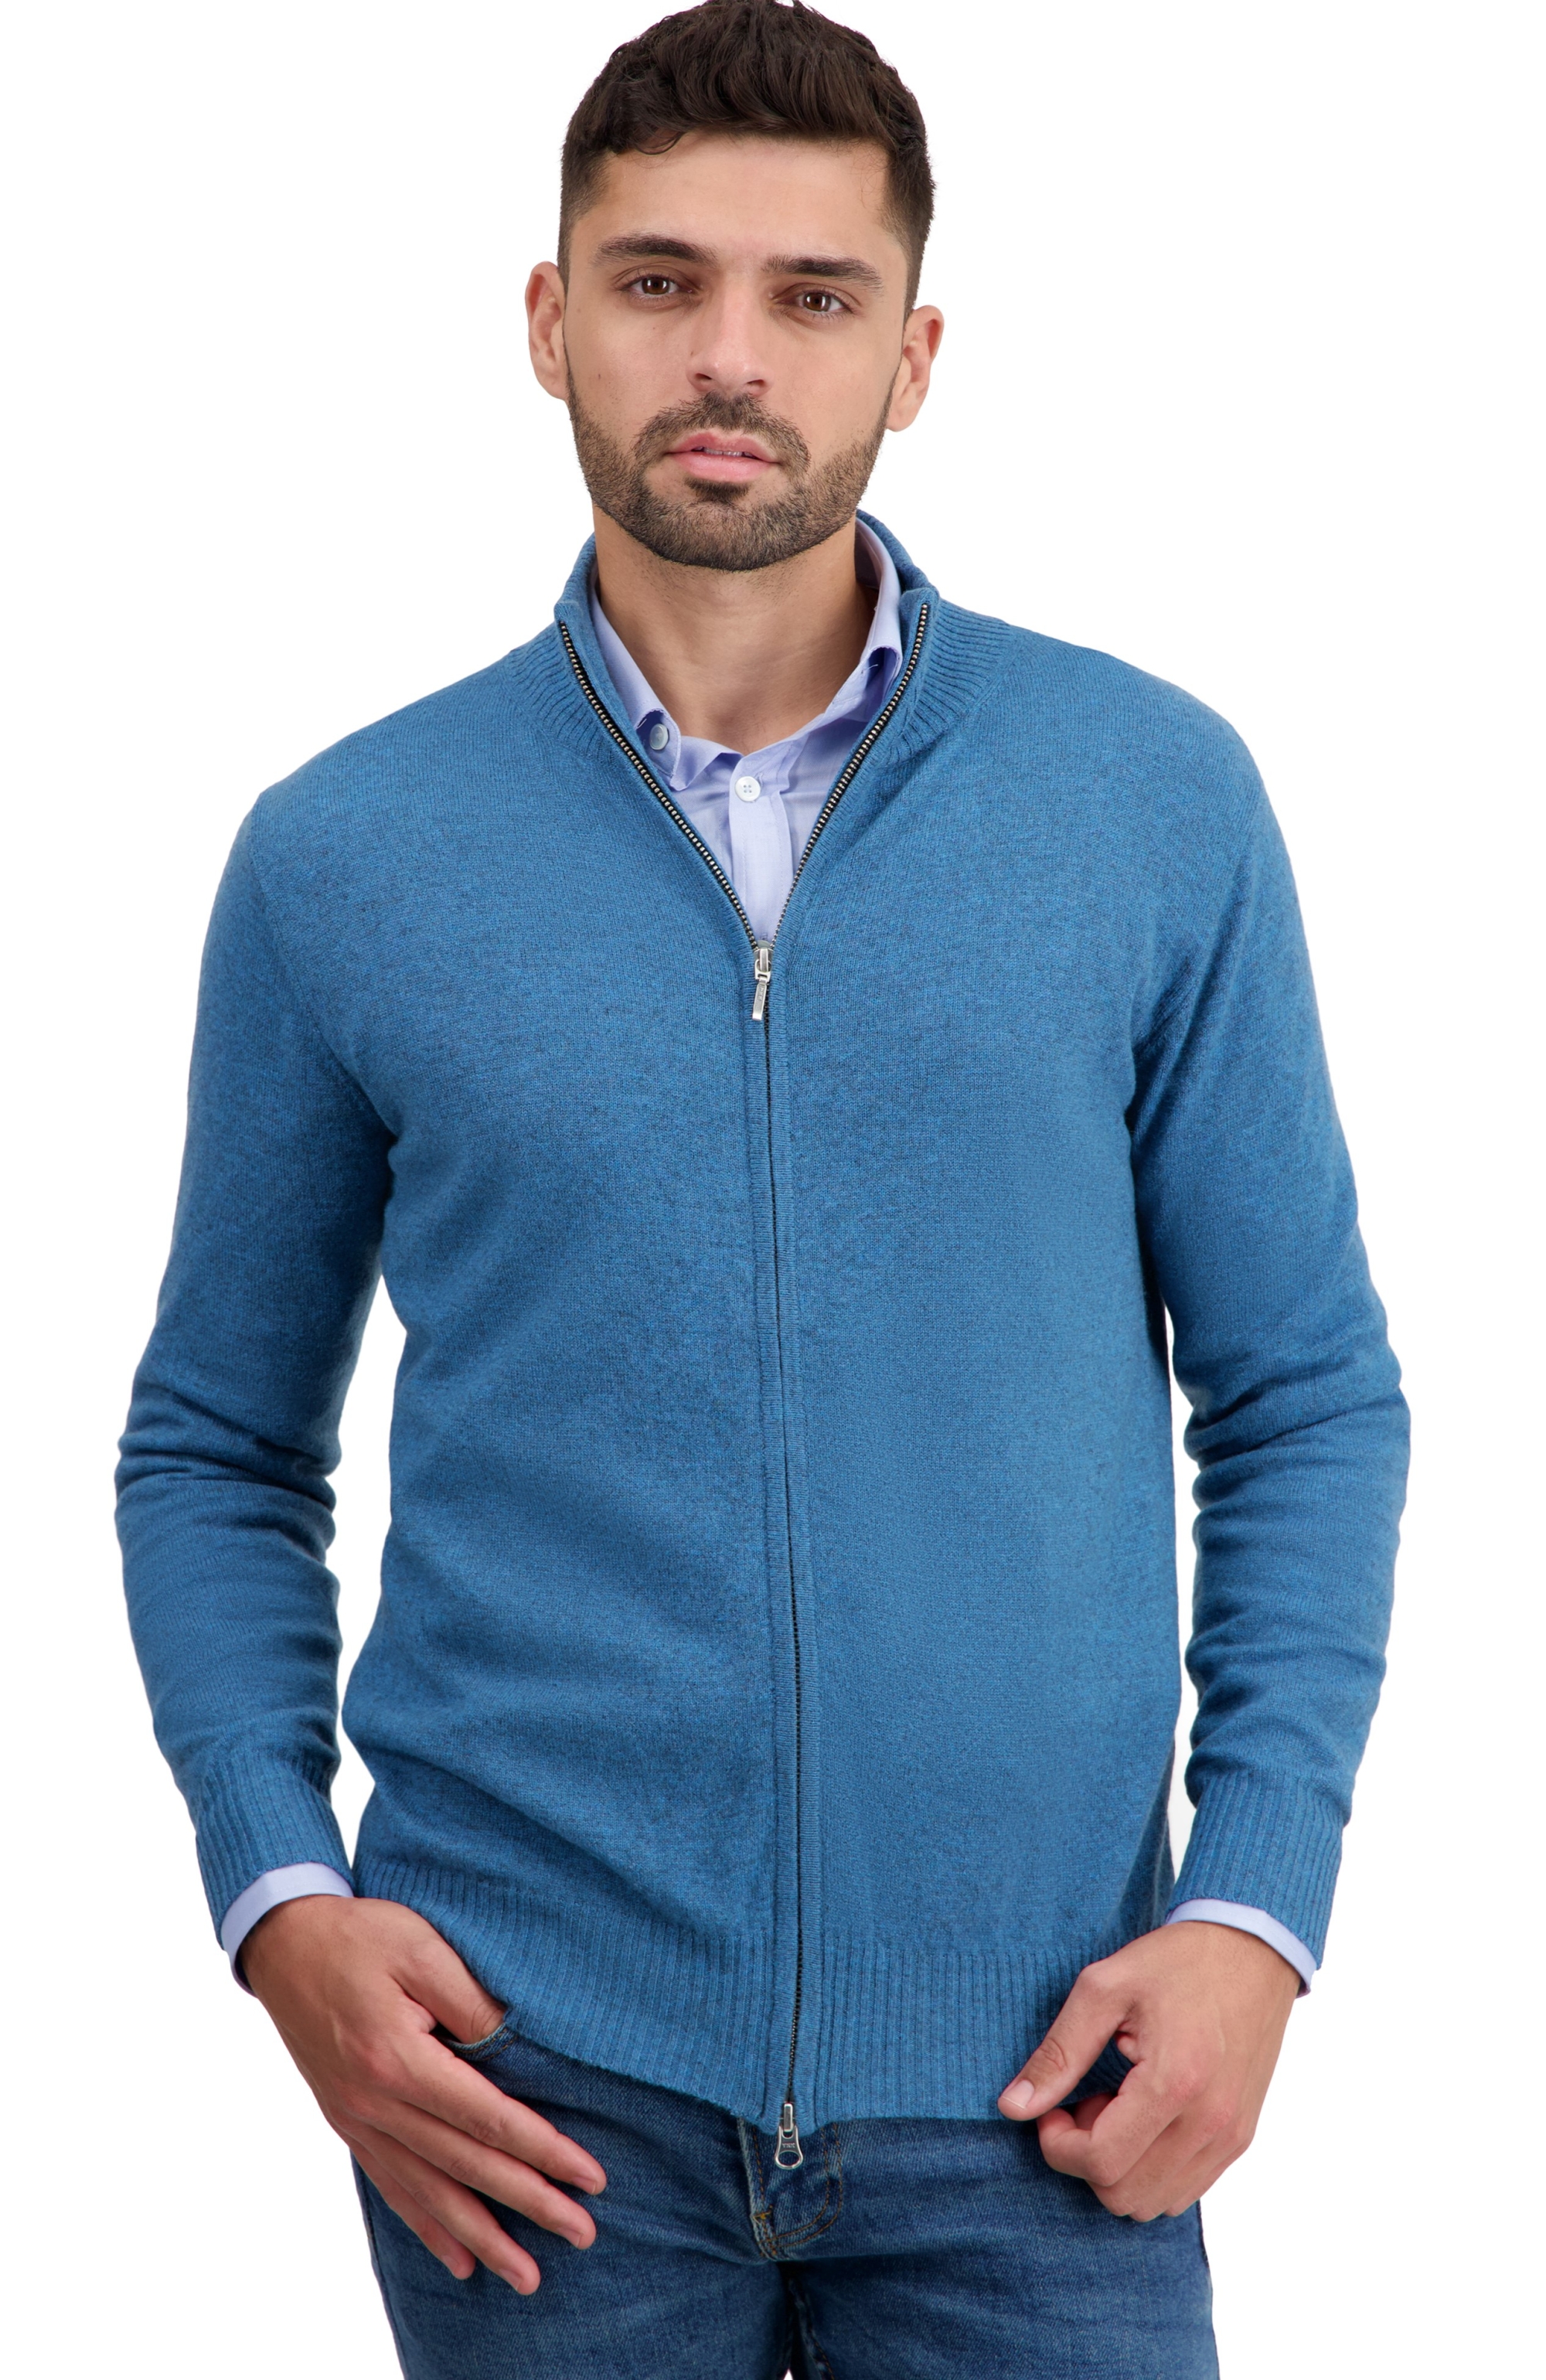 Cashmere men basic sweaters at low prices thobias first manor blue xl